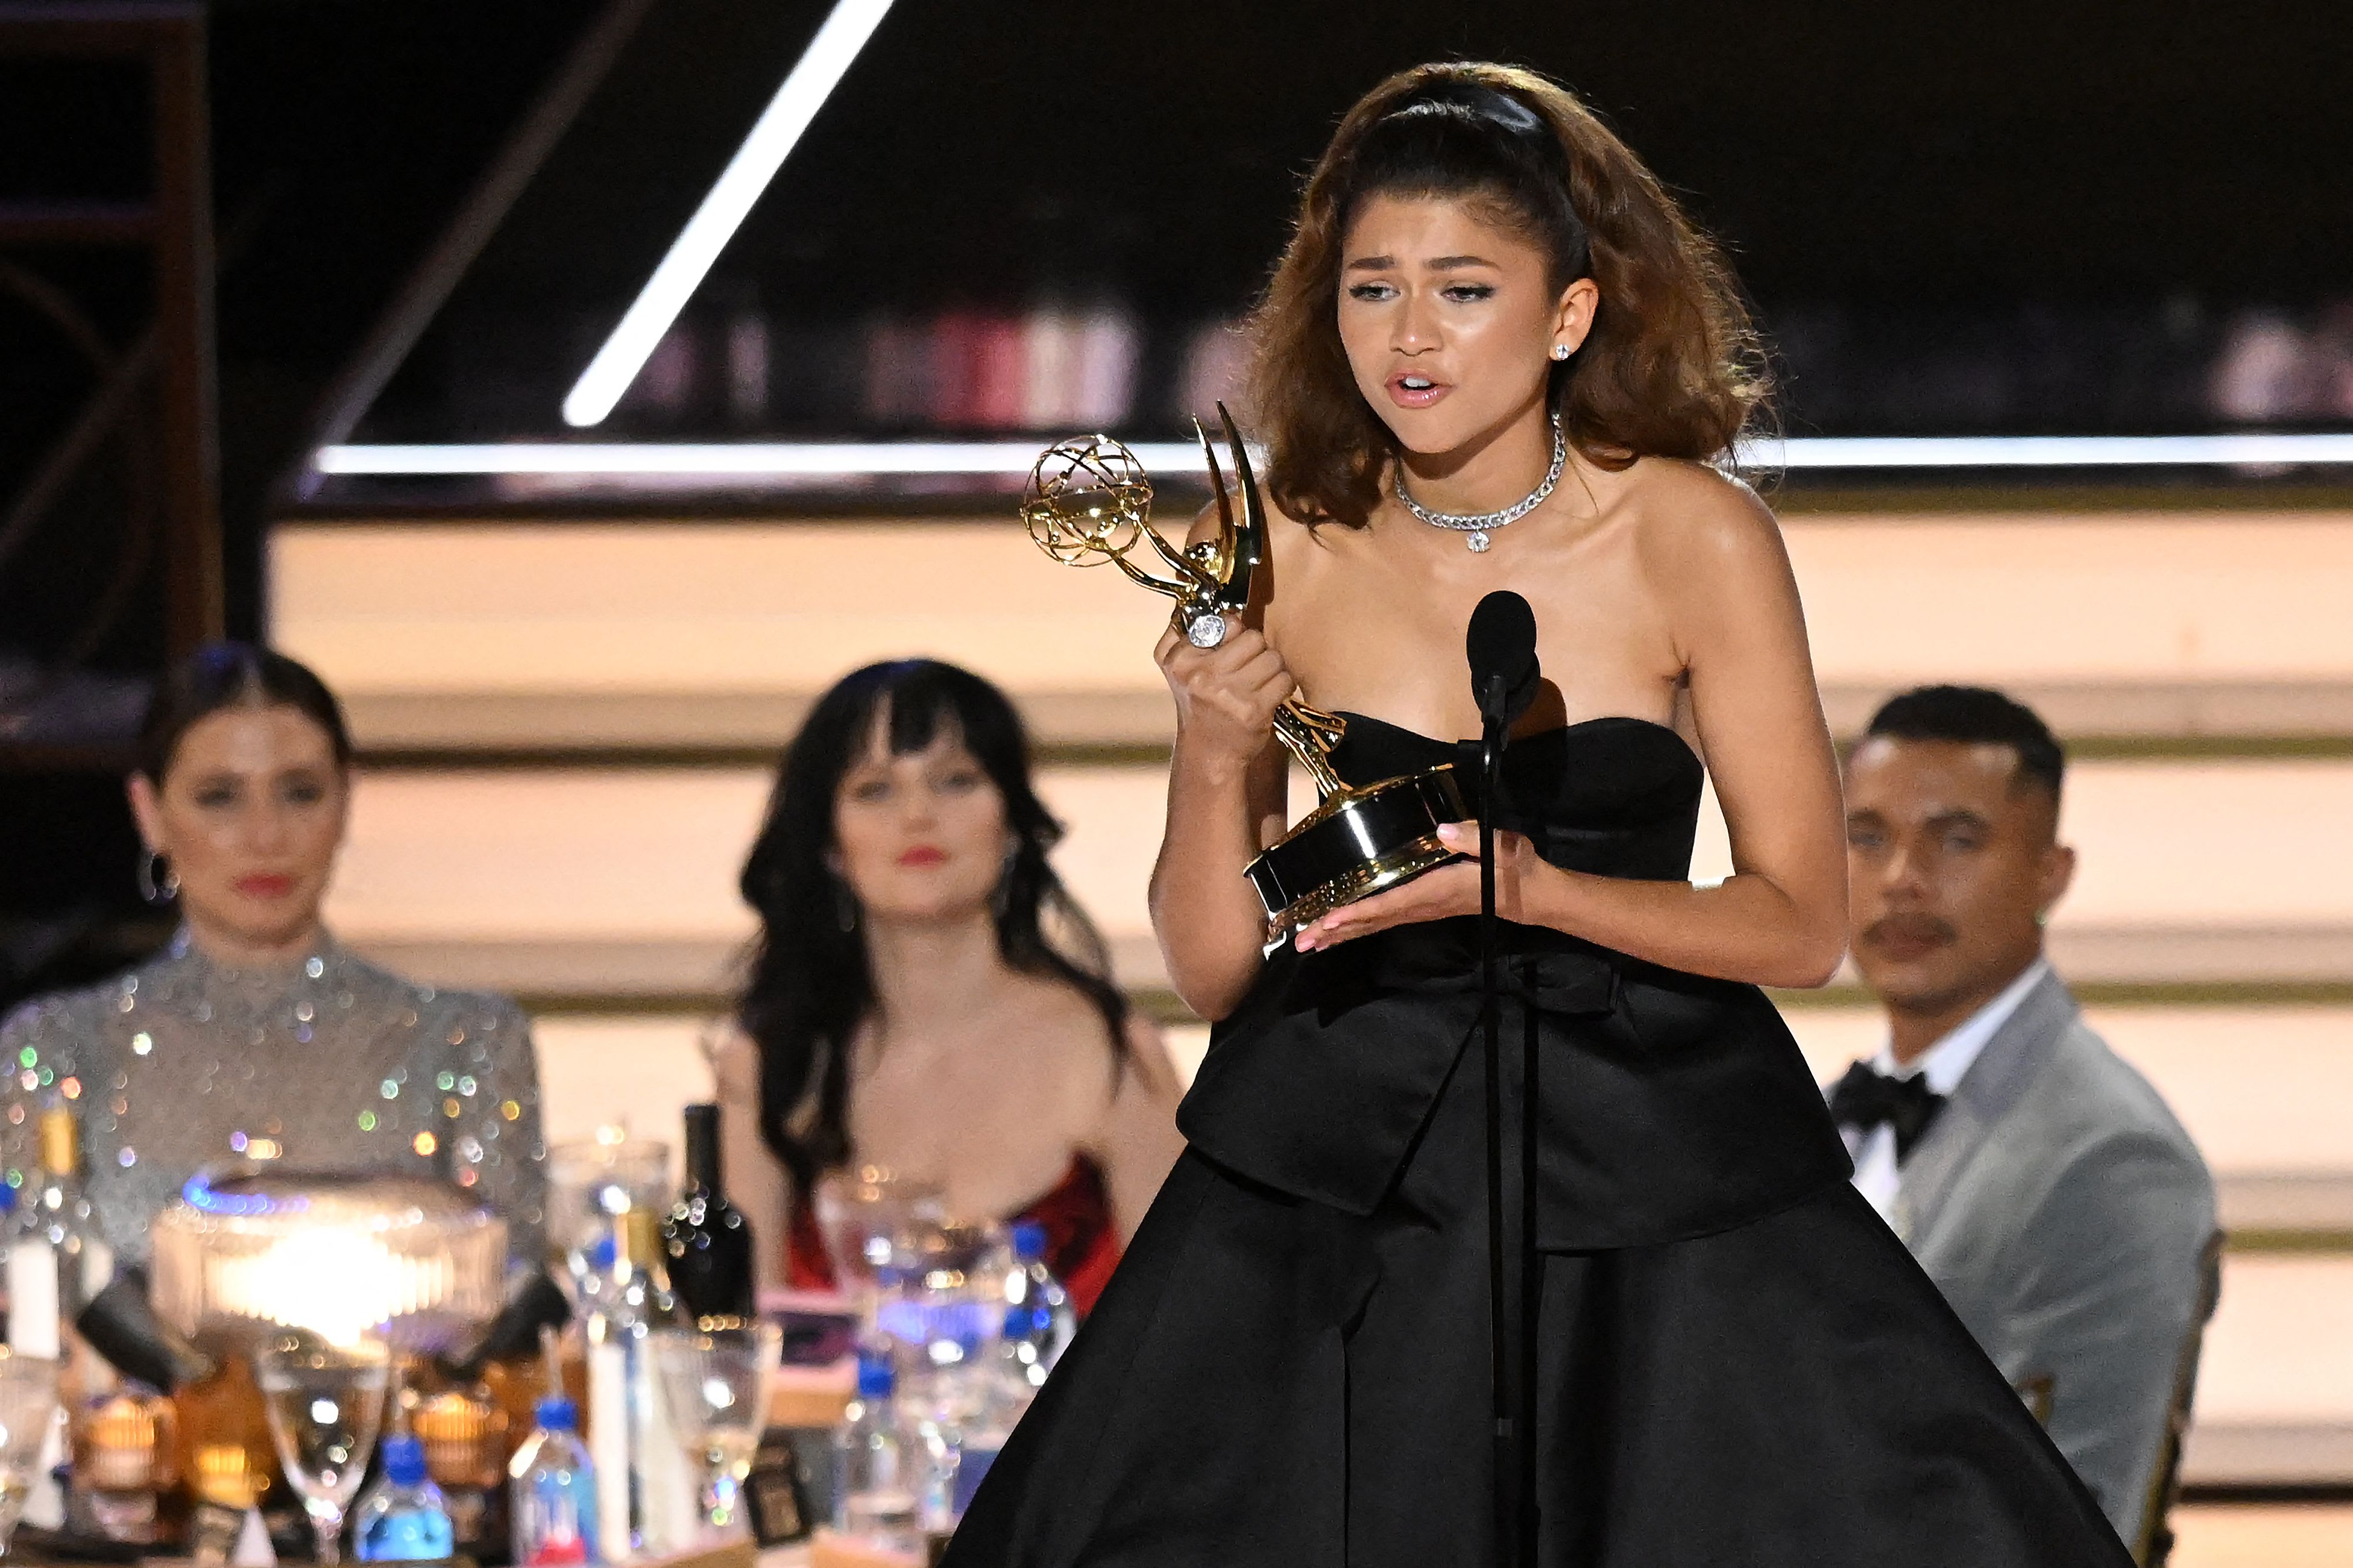 Emmys 2022: Zendaya becomes youngest two-time award winner as she